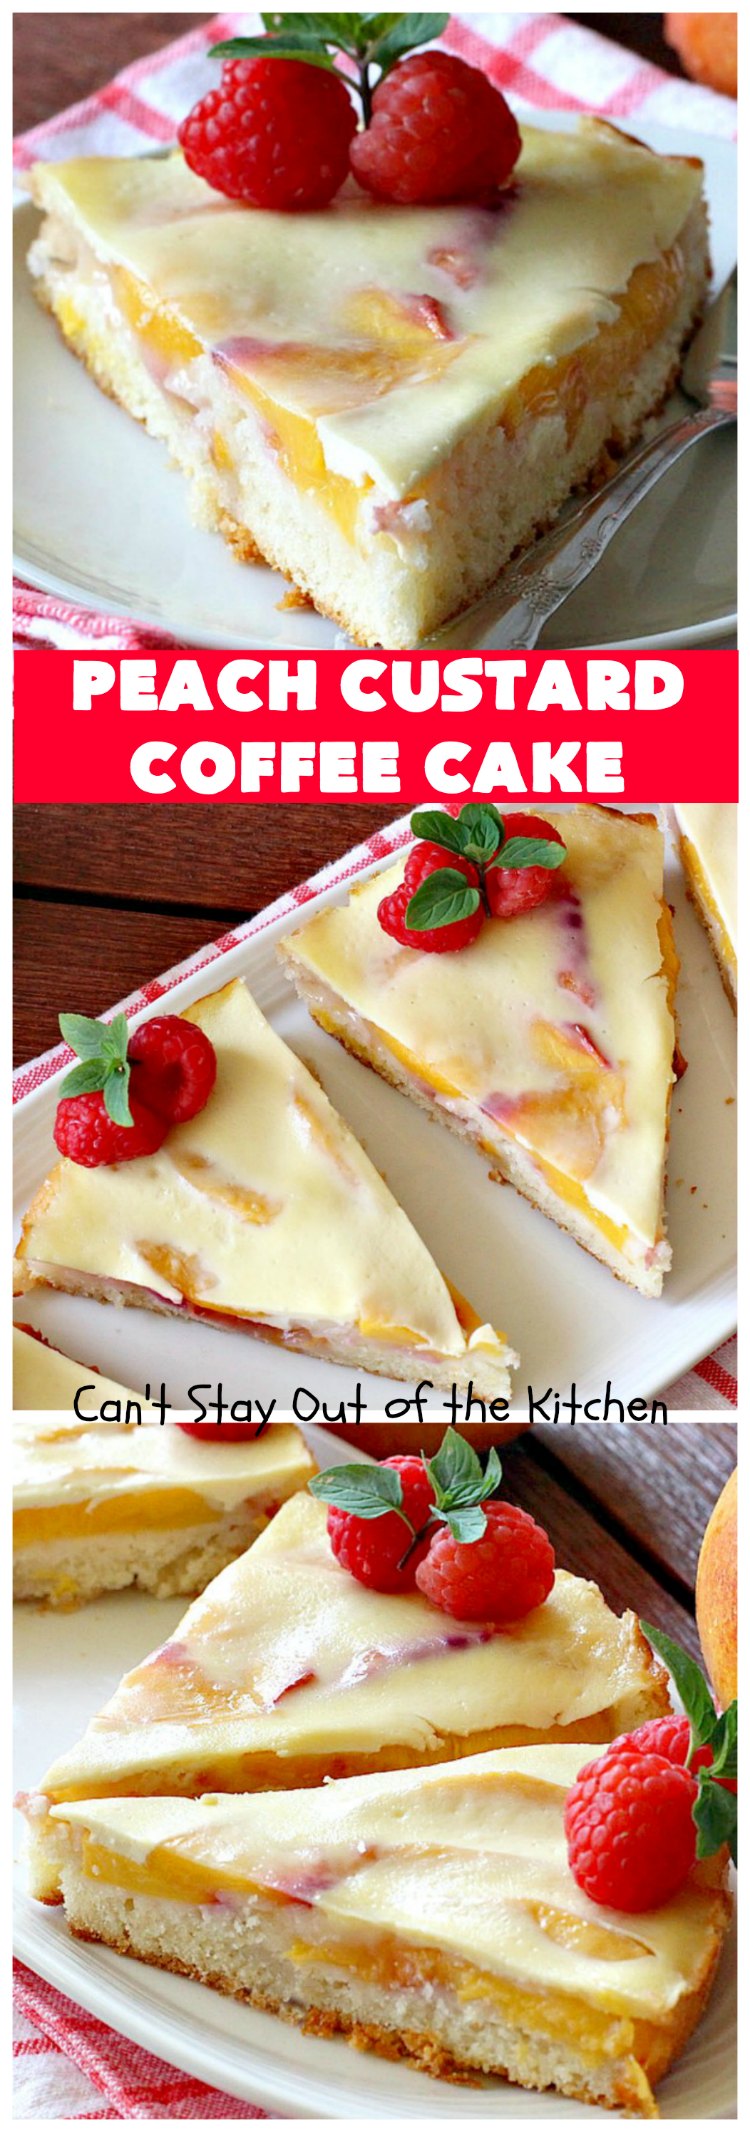 Peach Custard Coffee Cake | Can't Stay Out of the Kitchen